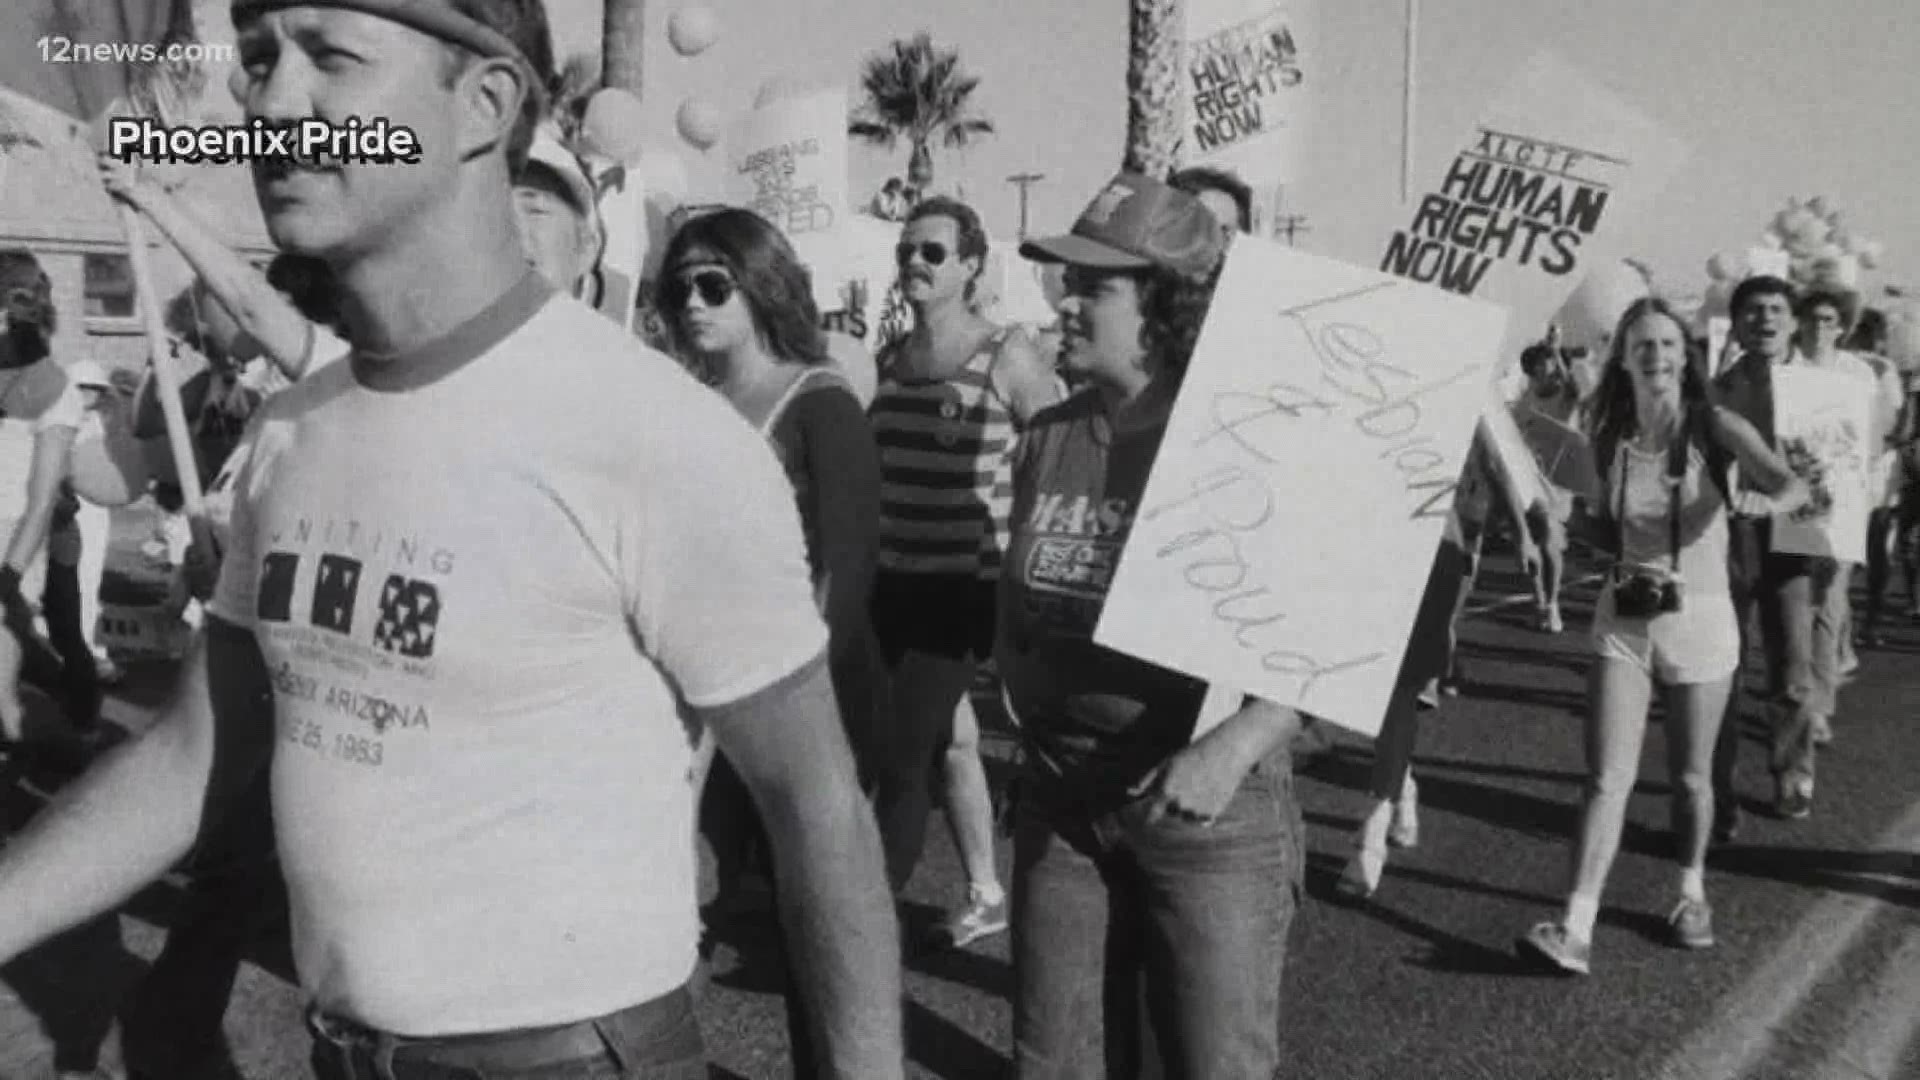 This year marks the 40th anniversary of Phoenix Pride. The march, which usually takes place in June, was delayed until November due to the virus outbreak.